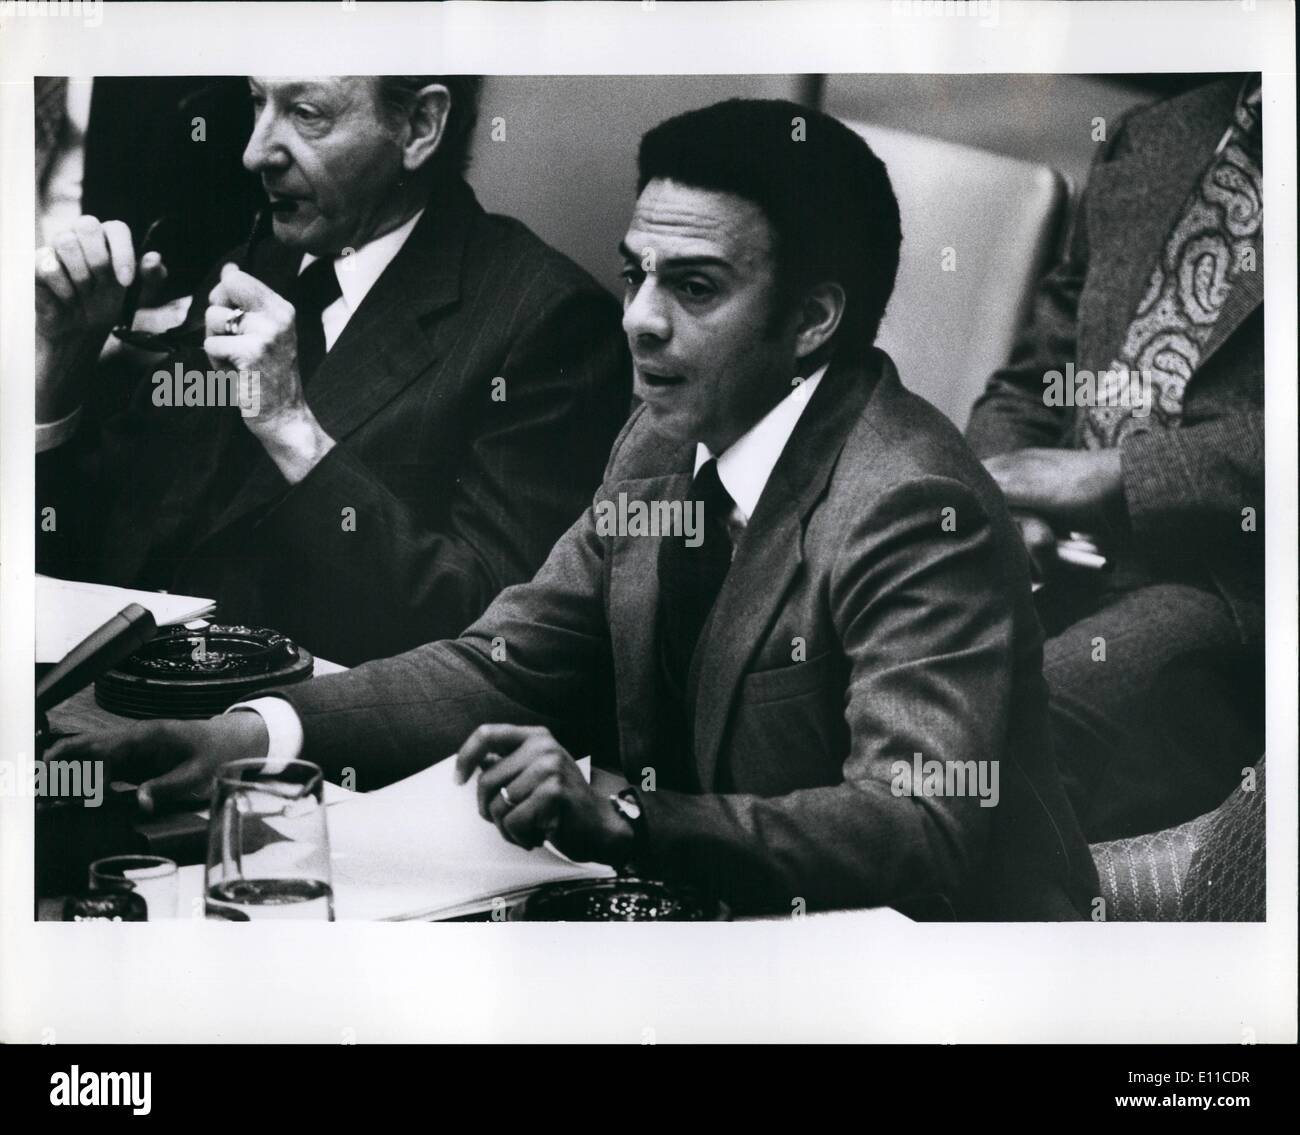 Mar. 03, 1977 - UN Security Council Meeting: March 24, 1977 on the Problem of South Africa. President of the Security Council during March 1977 is Ambassador Andrew Young. Stock Photo